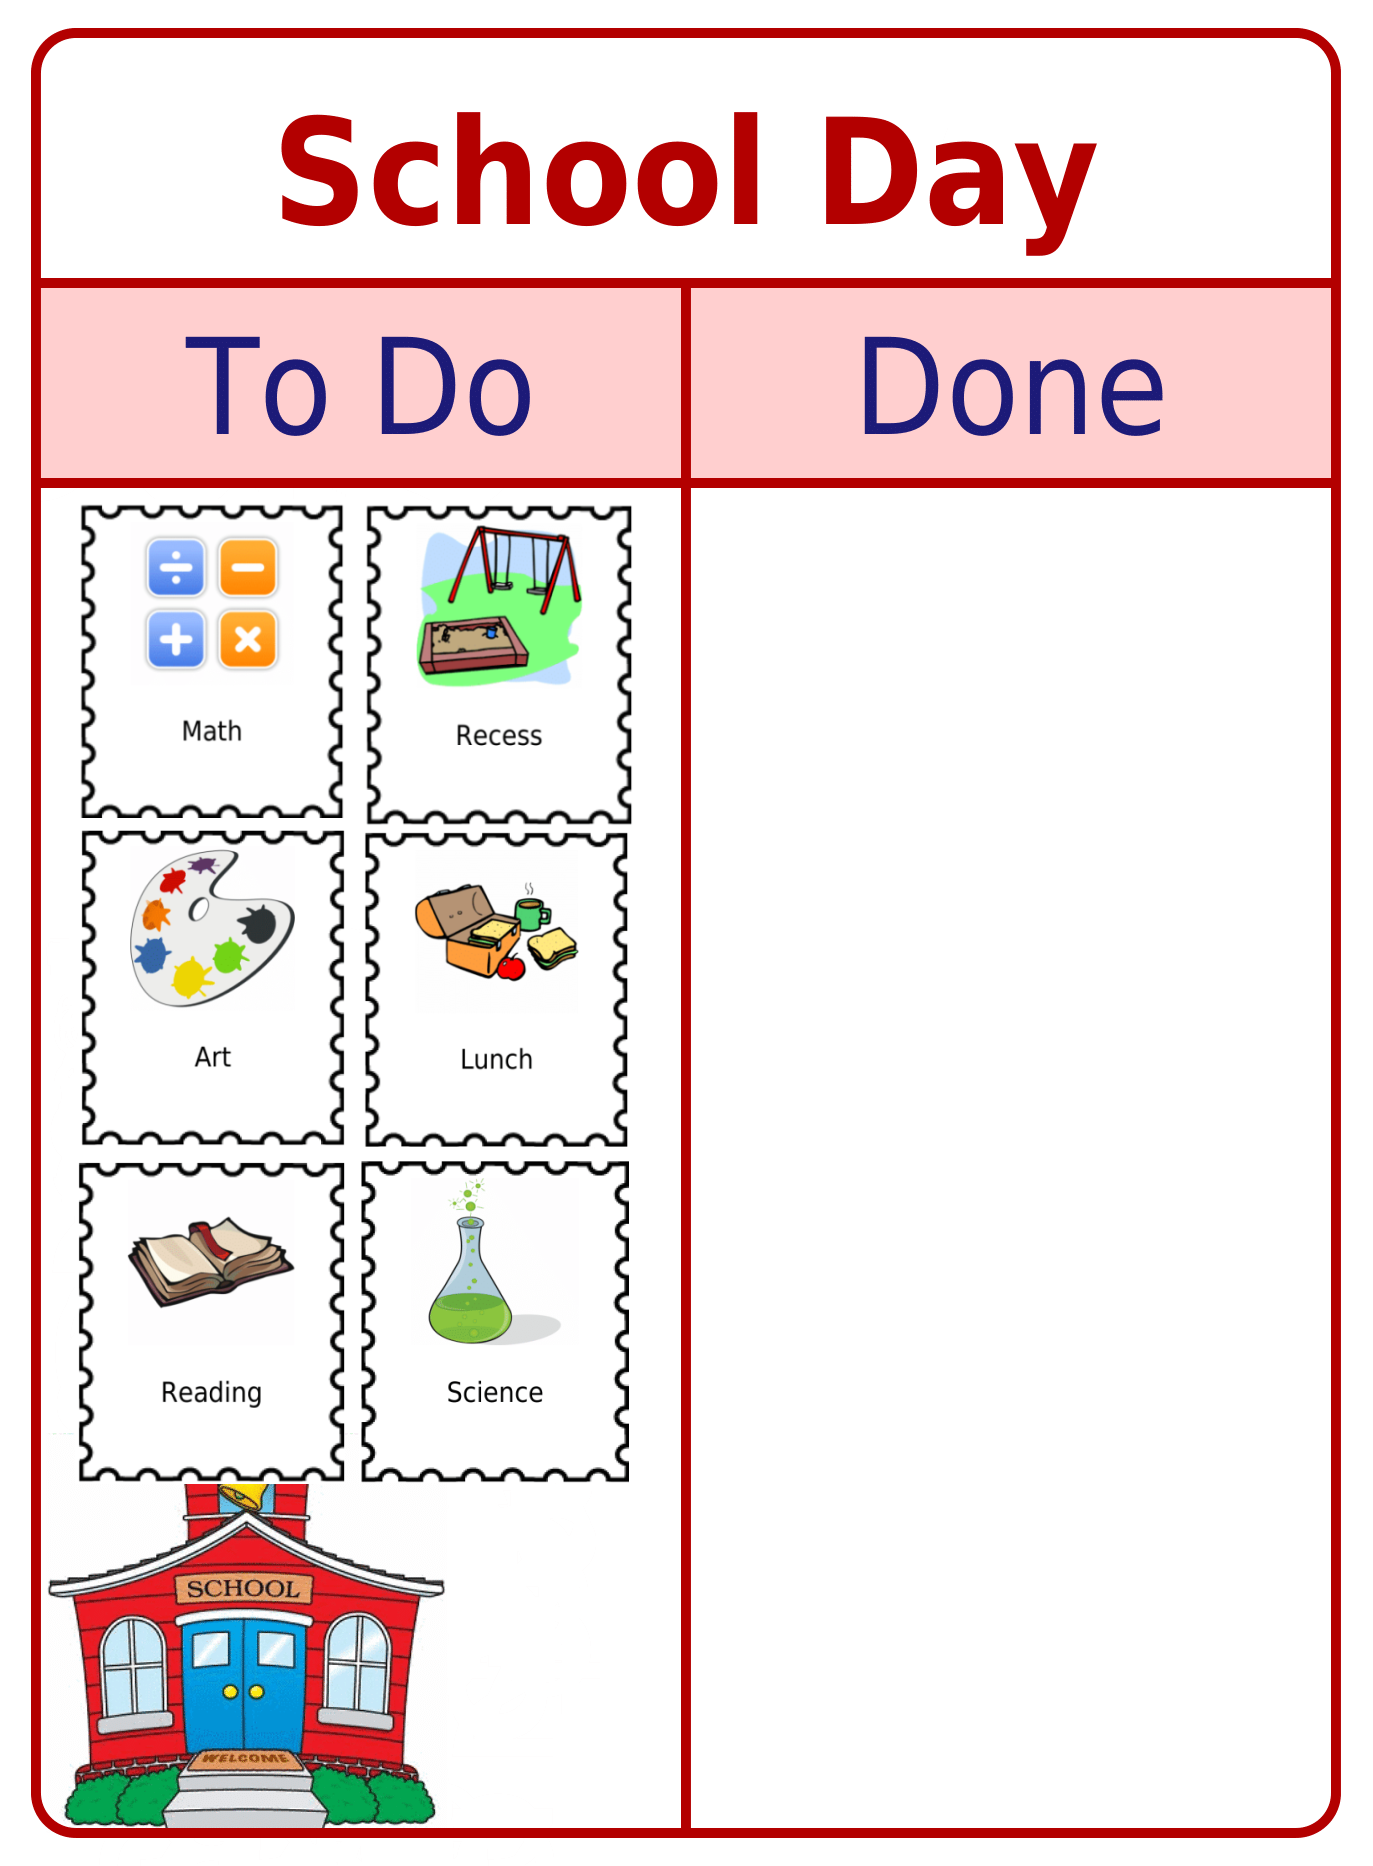 School Schedule To Do / Done Board with picture clips